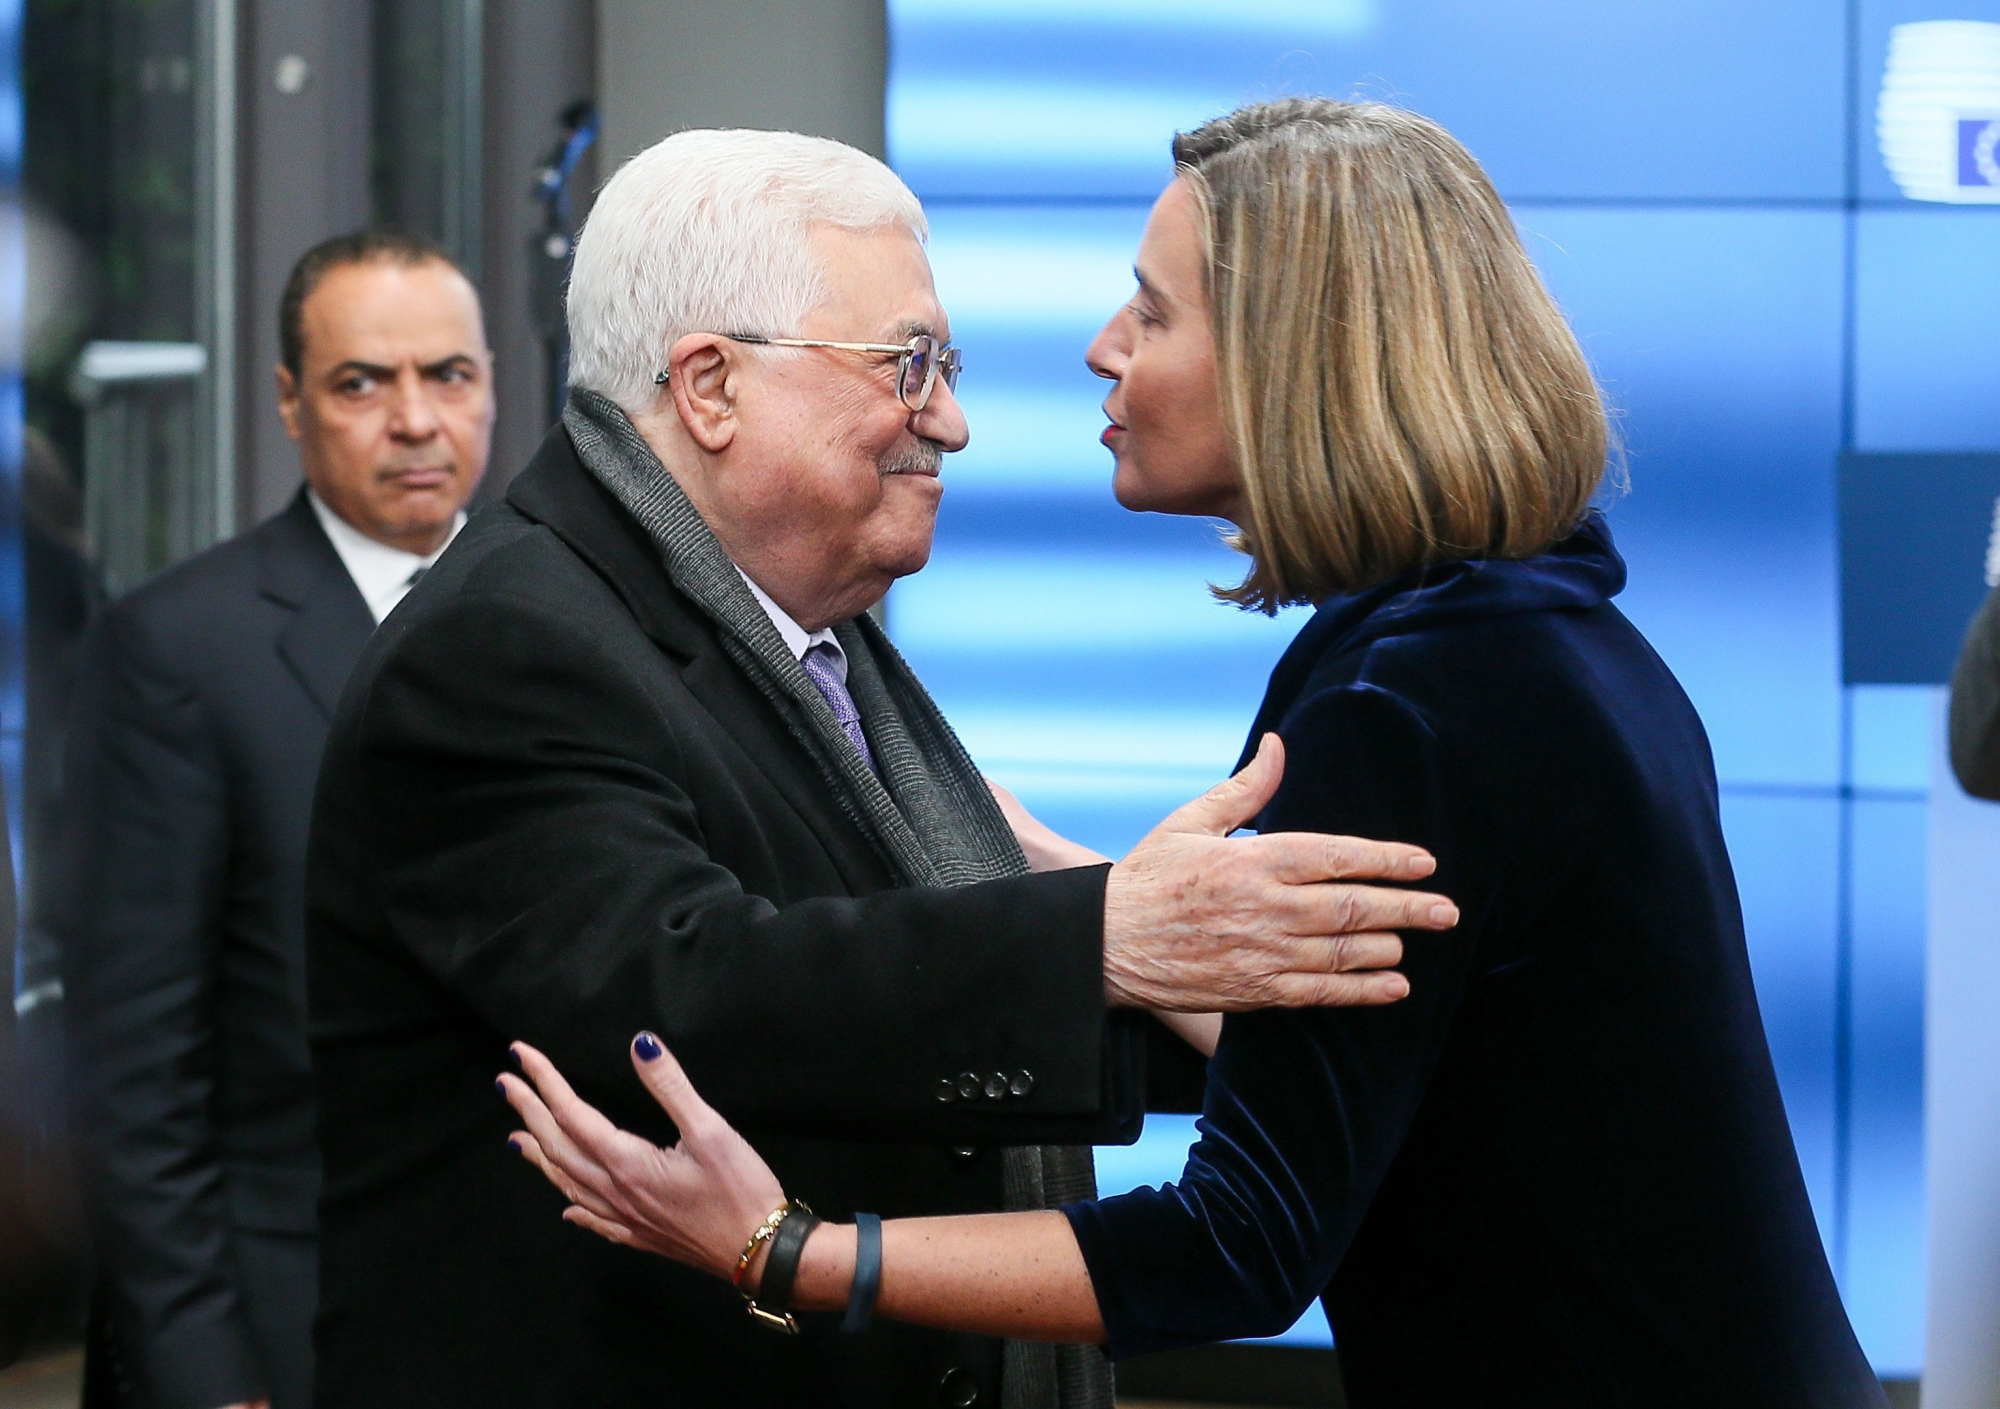 epa06464737 The Palestinian President Mahmoud Abbas (L) is welcomed by EU High Representative for Foreign Affairs Federica Mogherini (R) prior to a meeting at the EU Council in Brussels, Belgium, 22 January 2017.  EPA/STEPHANIE LECOCQ BELGIUM EU PALESTINE DIPLOMACY